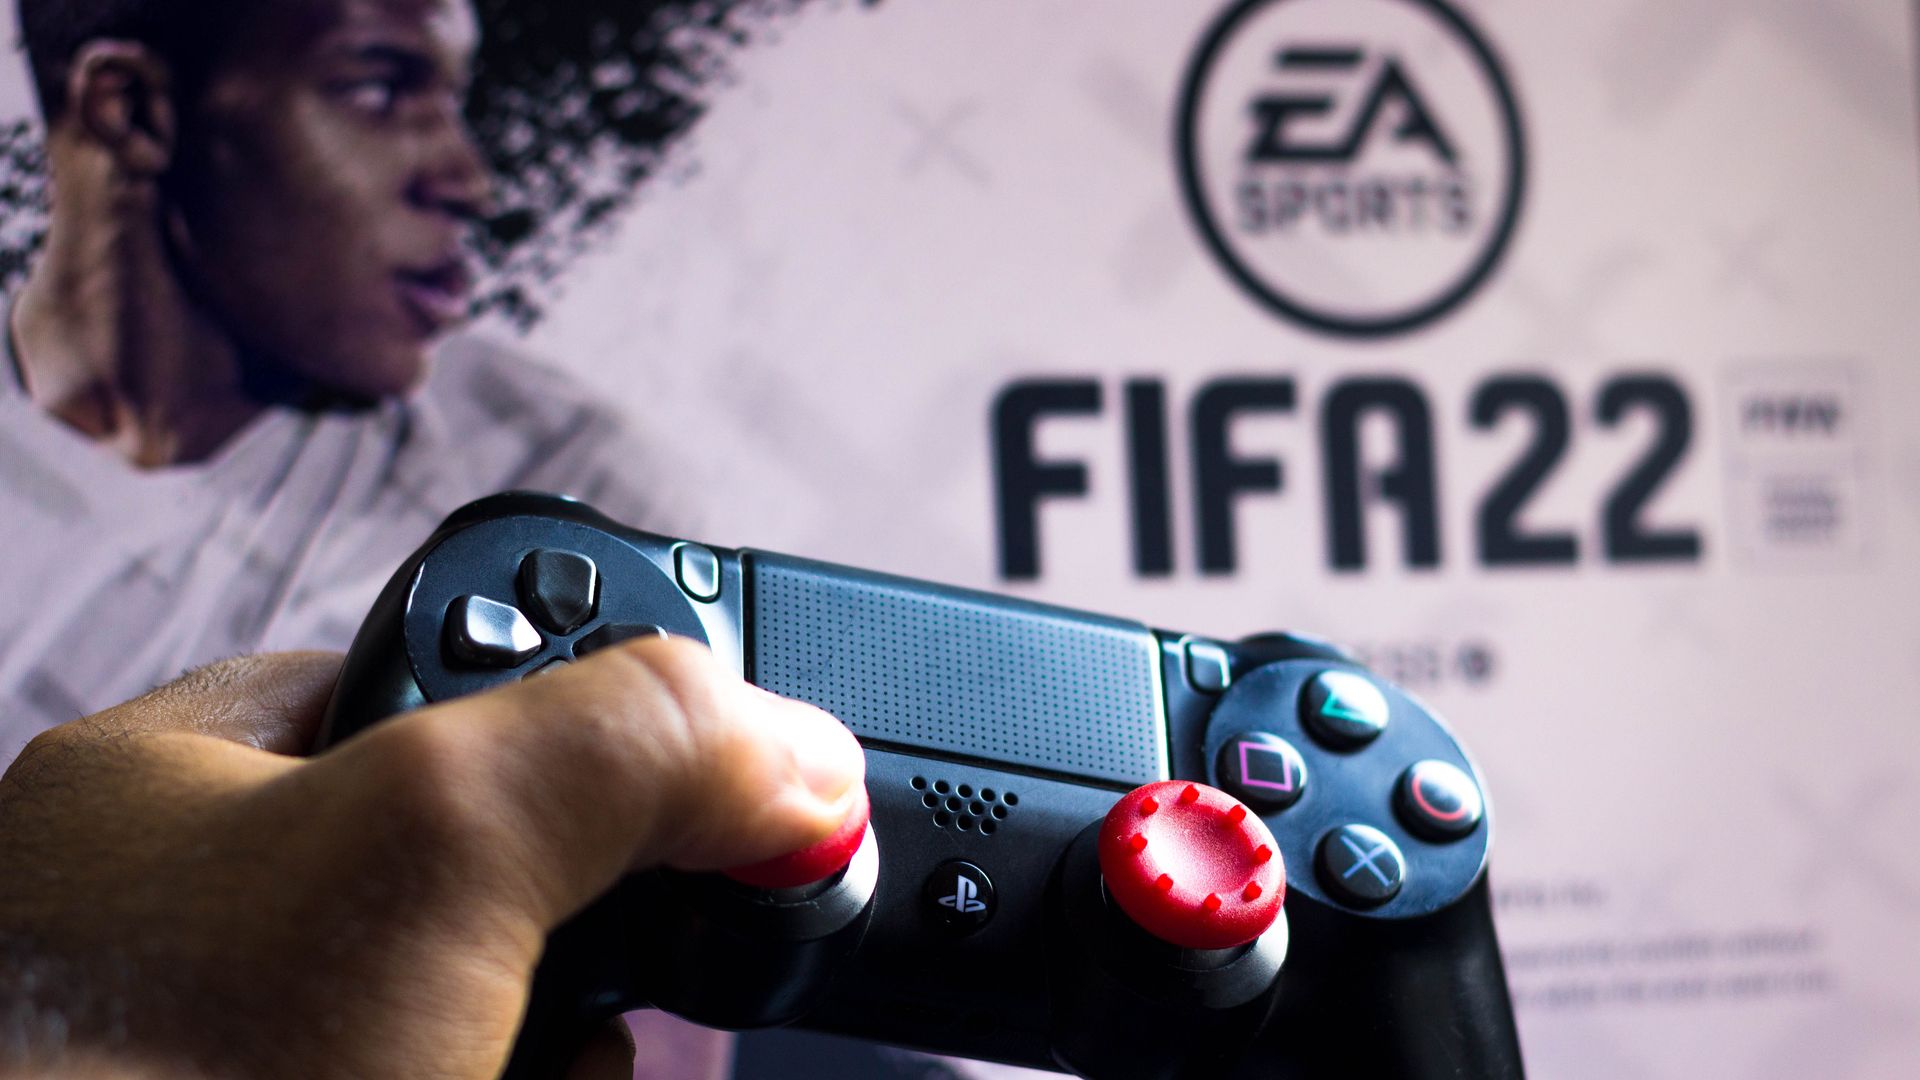 FIFA 22 logo with a controller in front of it 